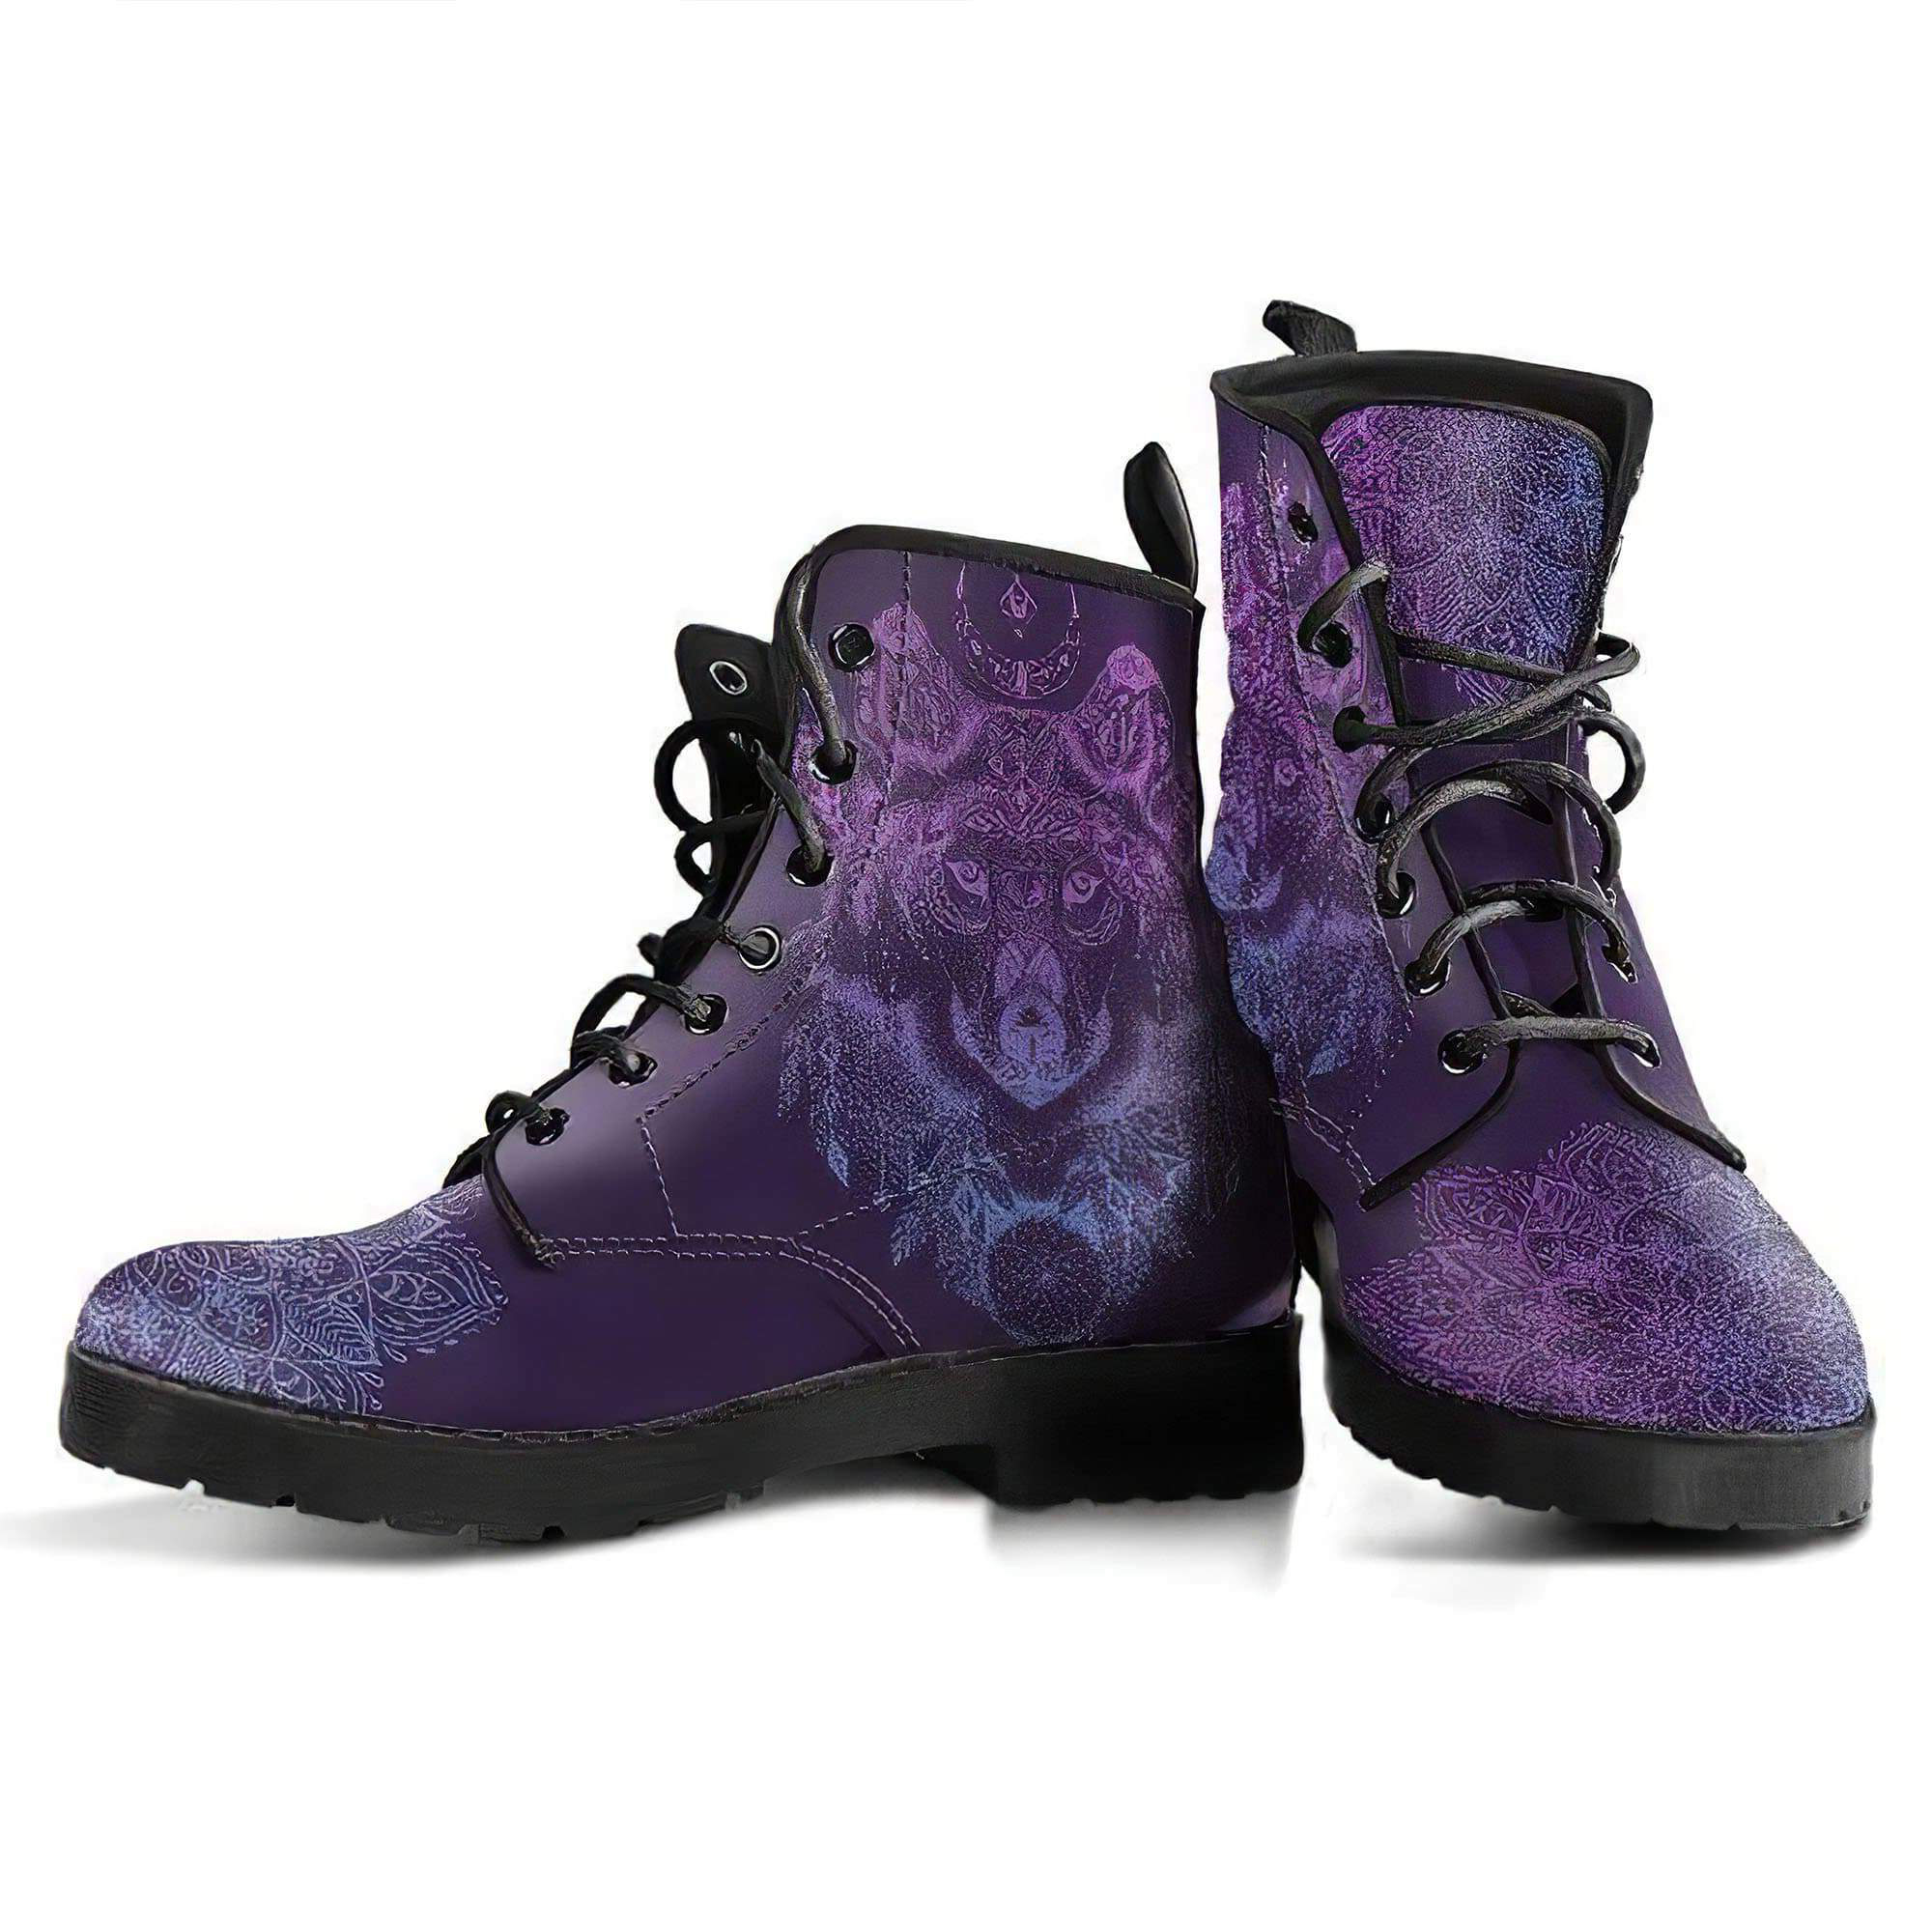 purple-wolf-handcrafted-boots-women-s-leather-boots-12051941228605.jpg